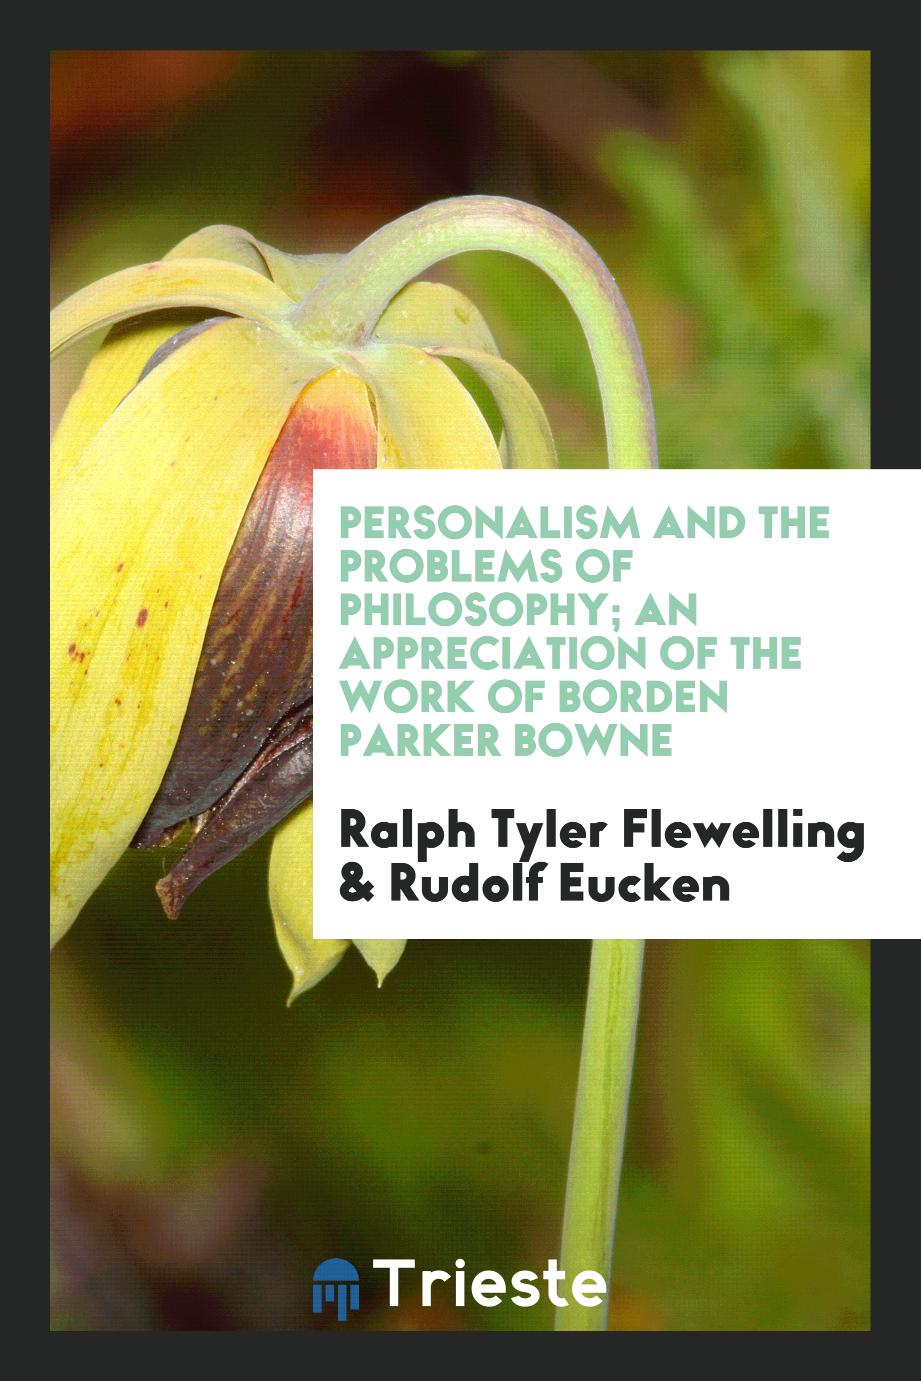 Personalism and the problems of philosophy; an appreciation of the work of Borden Parker Bowne